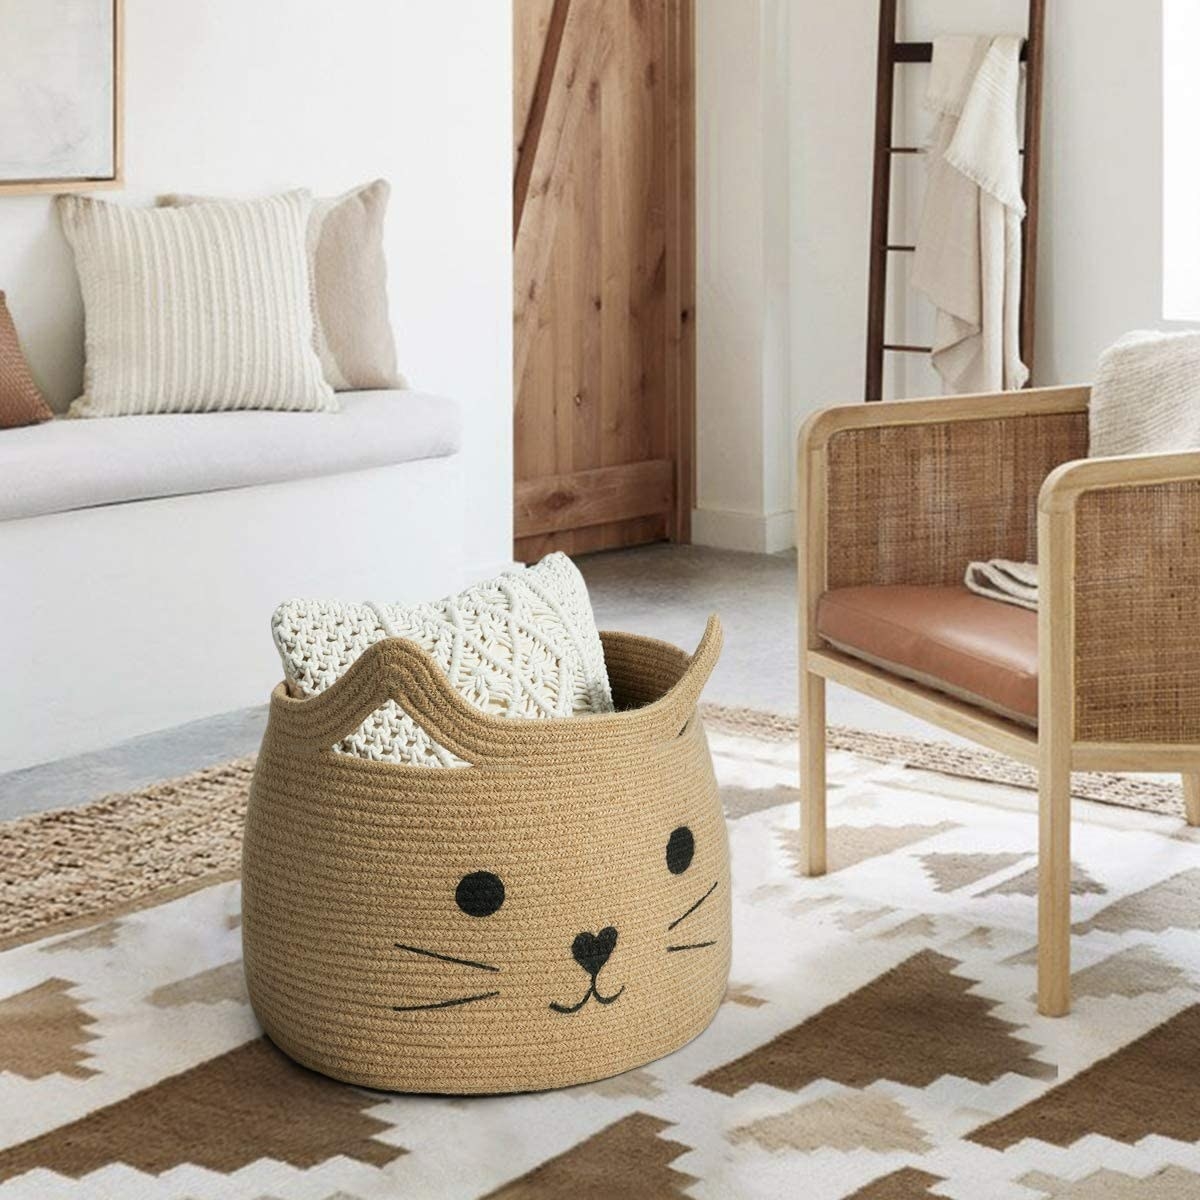 The cat-shaped rope basket in the middle of a living room with a throw pillow inside